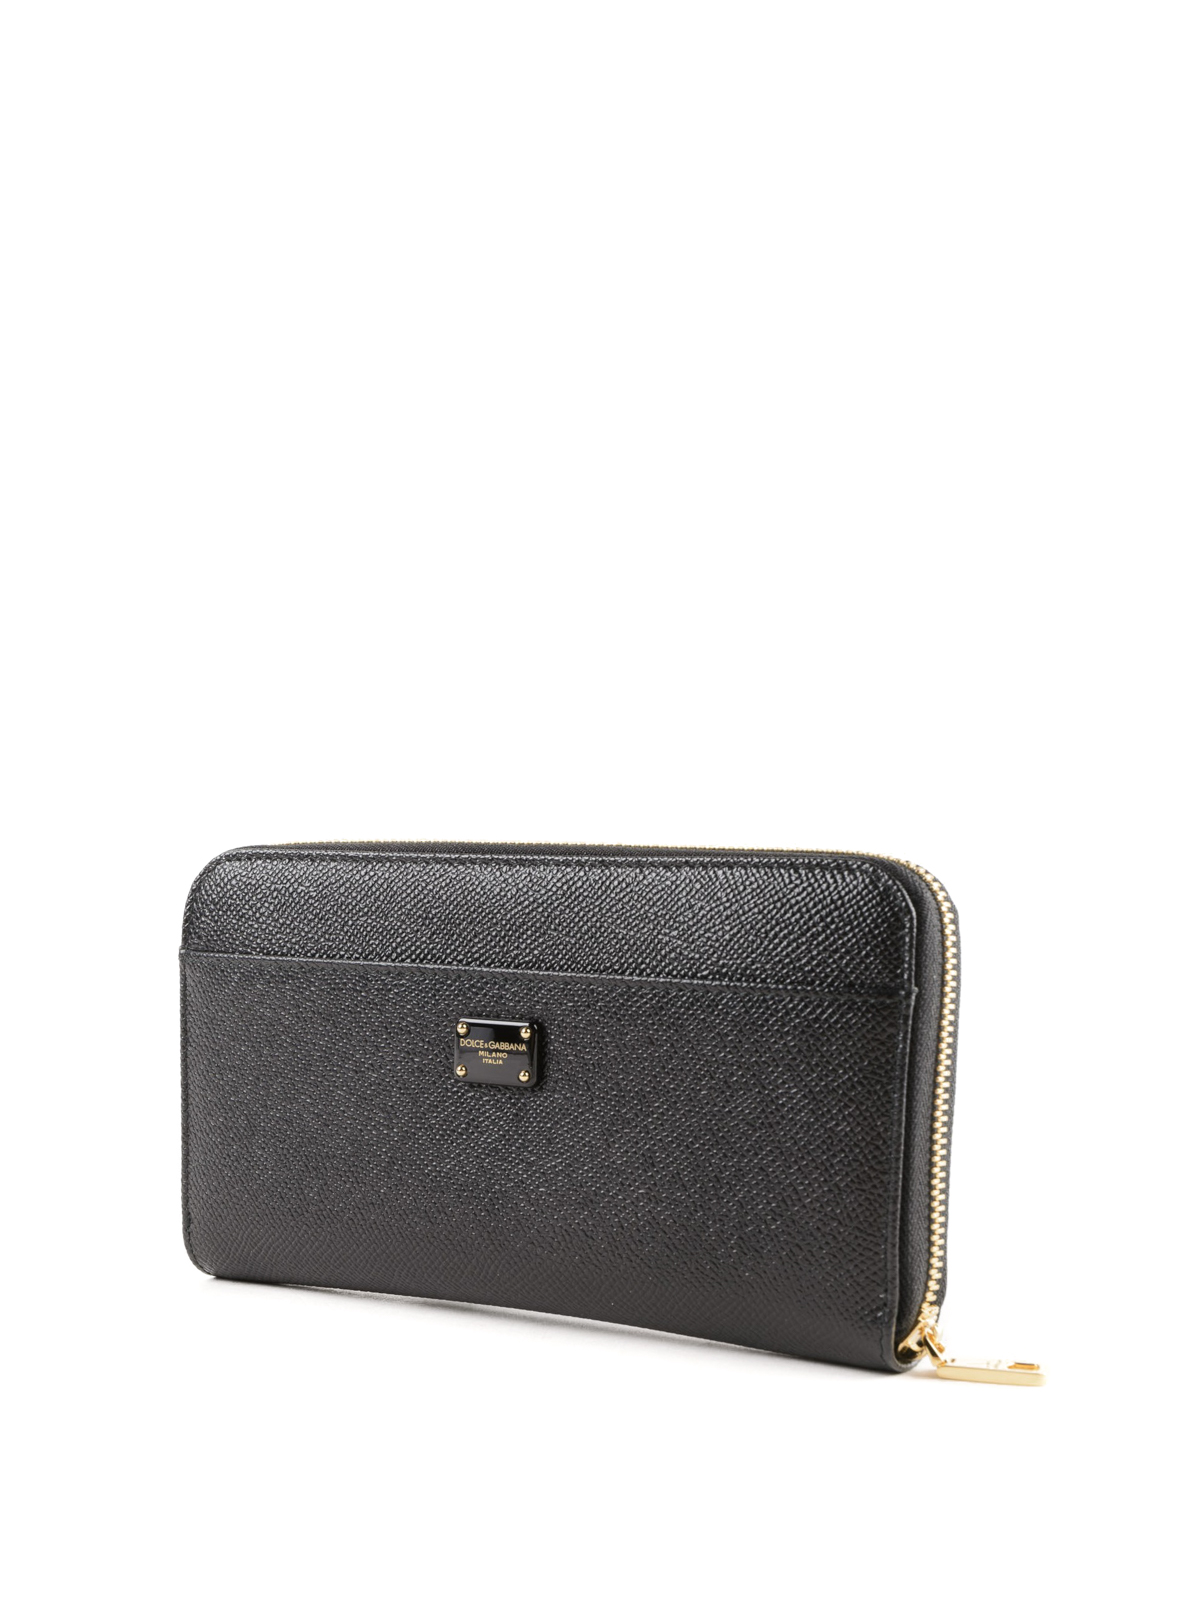 dolce and gabbana dauphine wallet